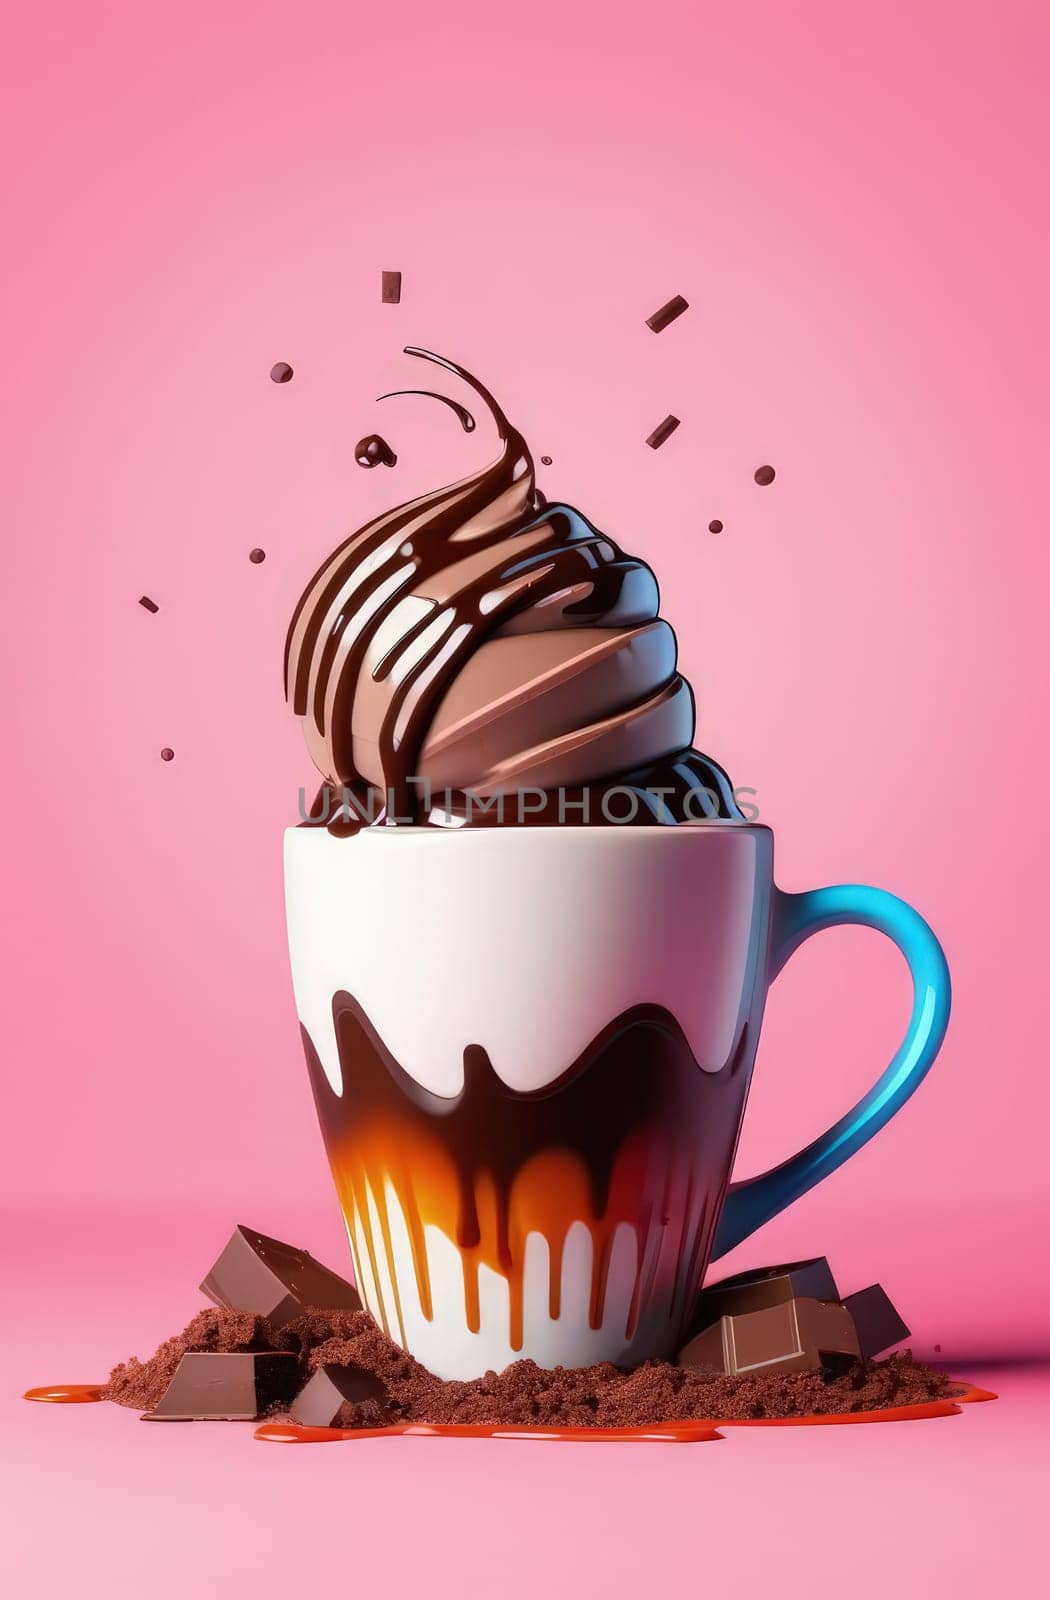 Delicious ice cream coffee dessert in cup, beautifully presented on vibrant pink background. For advertising, banner, relaxation, lifestyle, menu, dessert, culinary, cafe themed content. Copy space